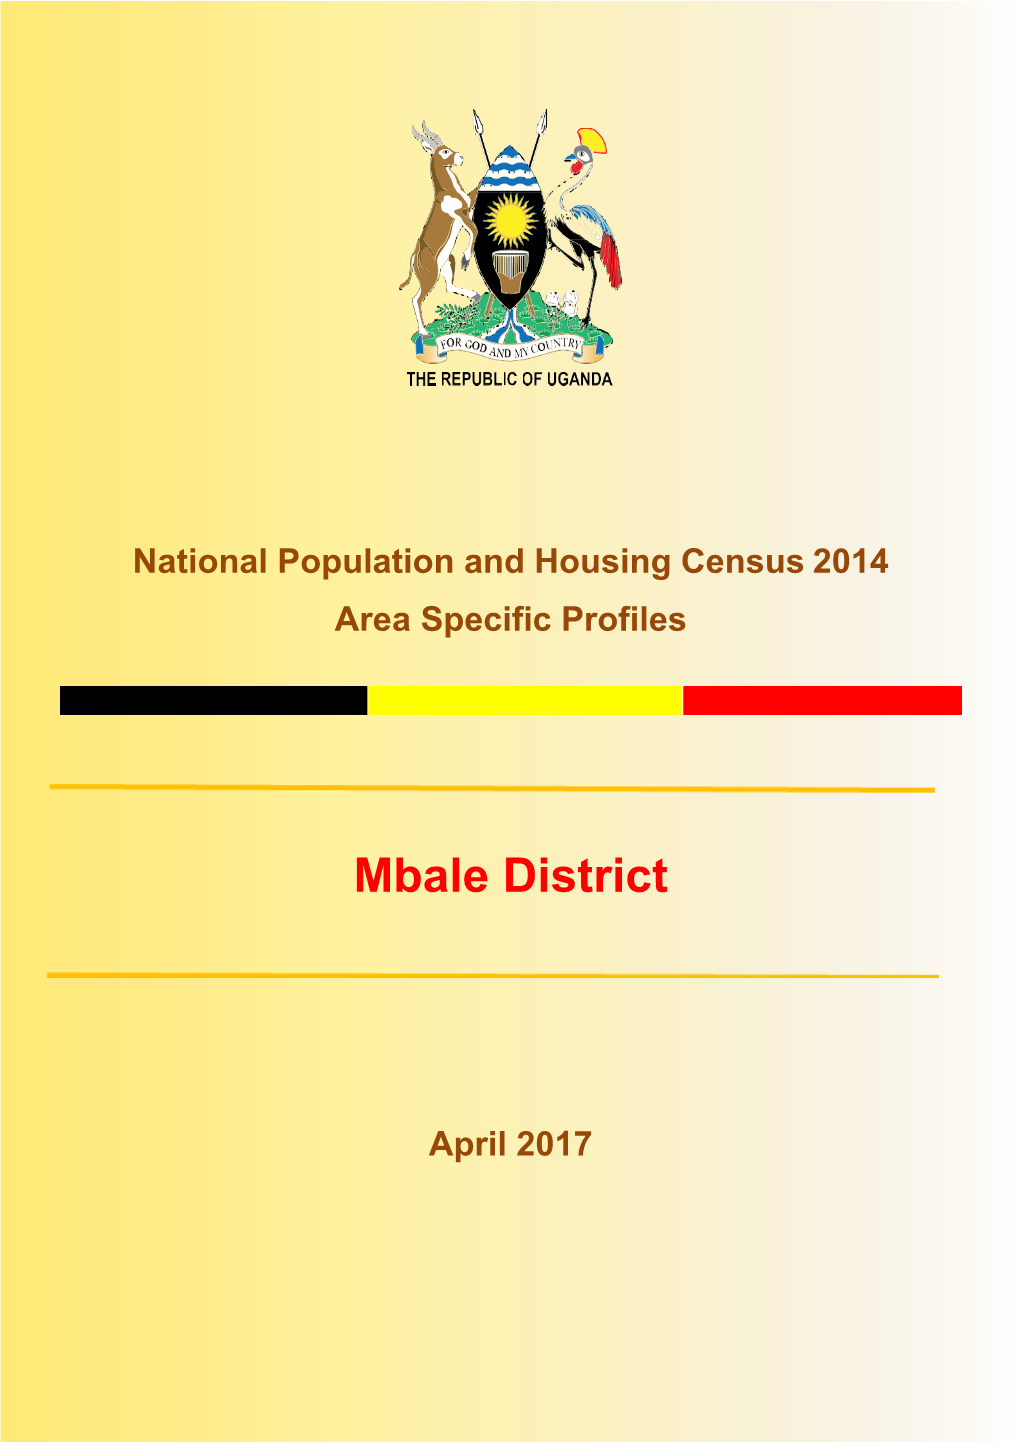 Mbale District